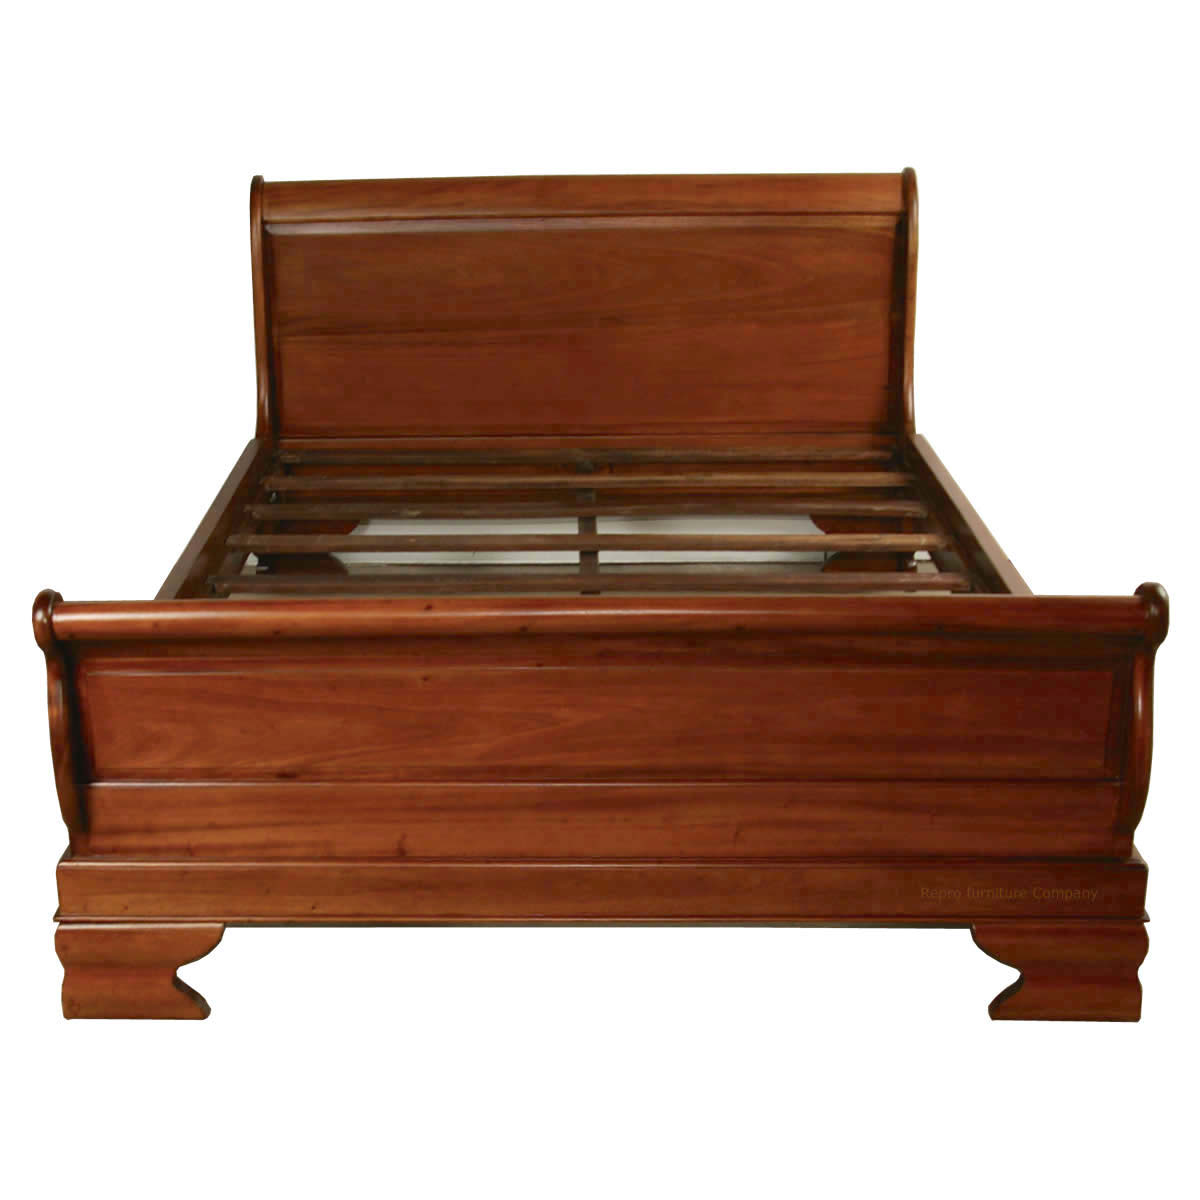 King Size Mahogany Sleigh Bed Repro, Dark Wood King Sleigh Bed